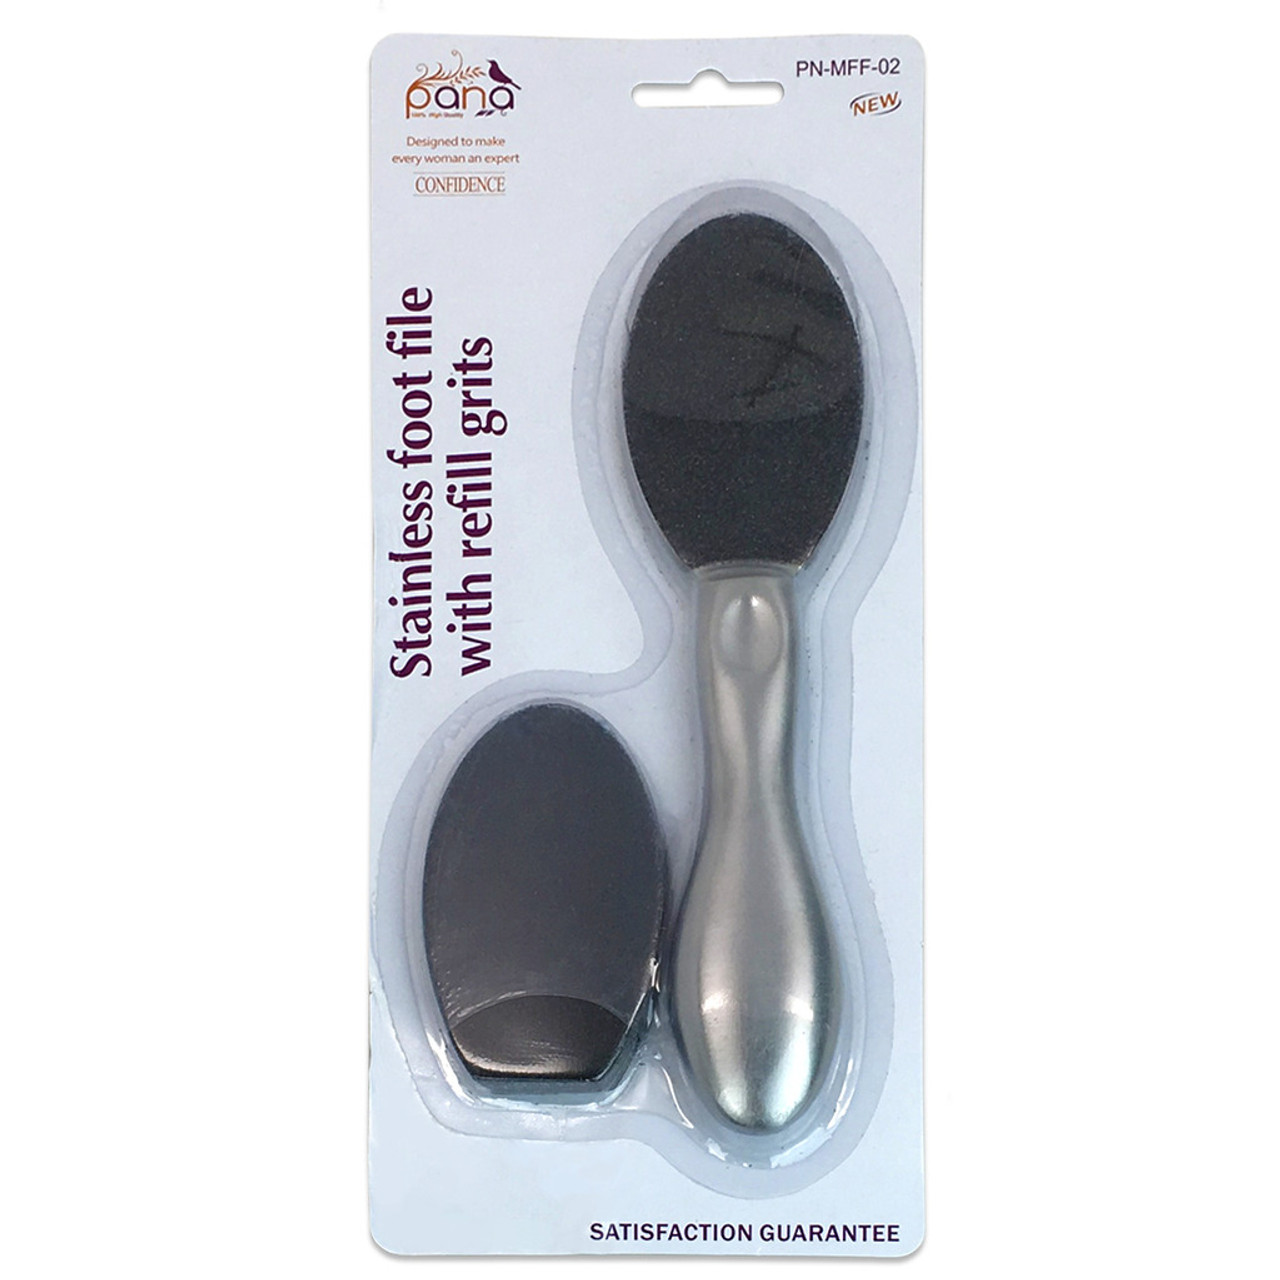 Reusable Stainless Steel Foot File